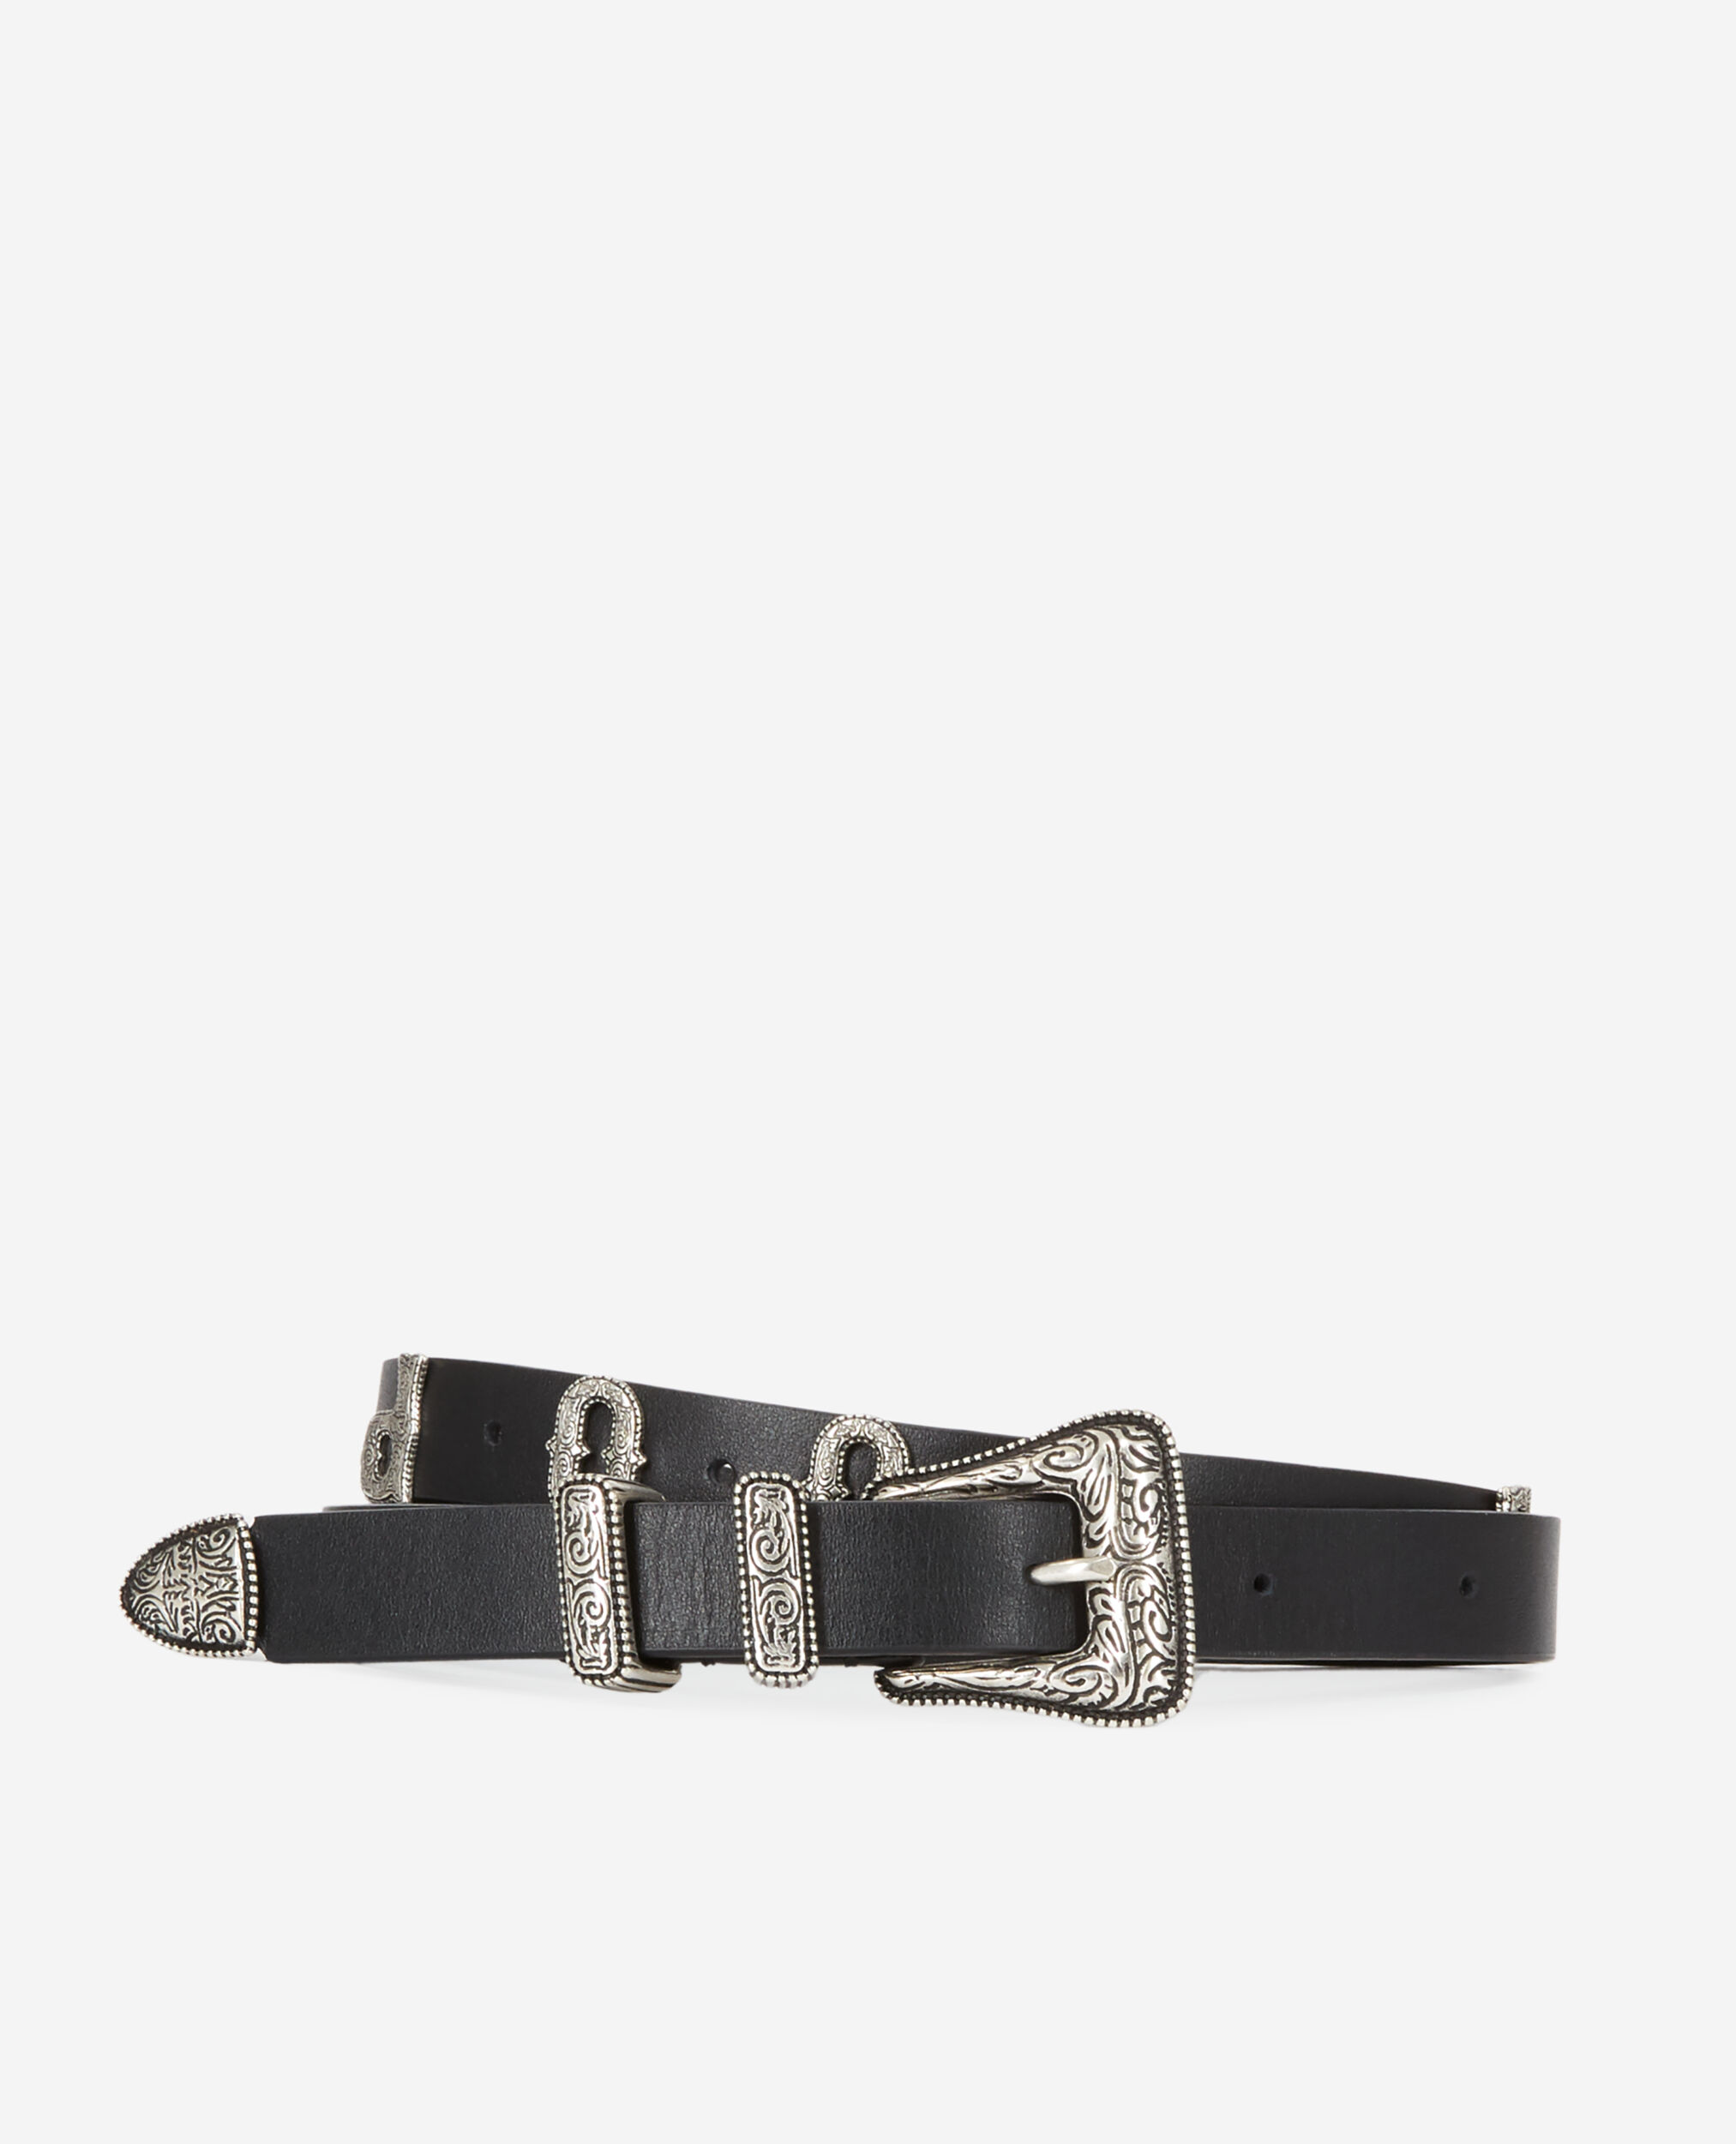 Thin black belt with logo and Western-style buckle, BLACK, hi-res image number null